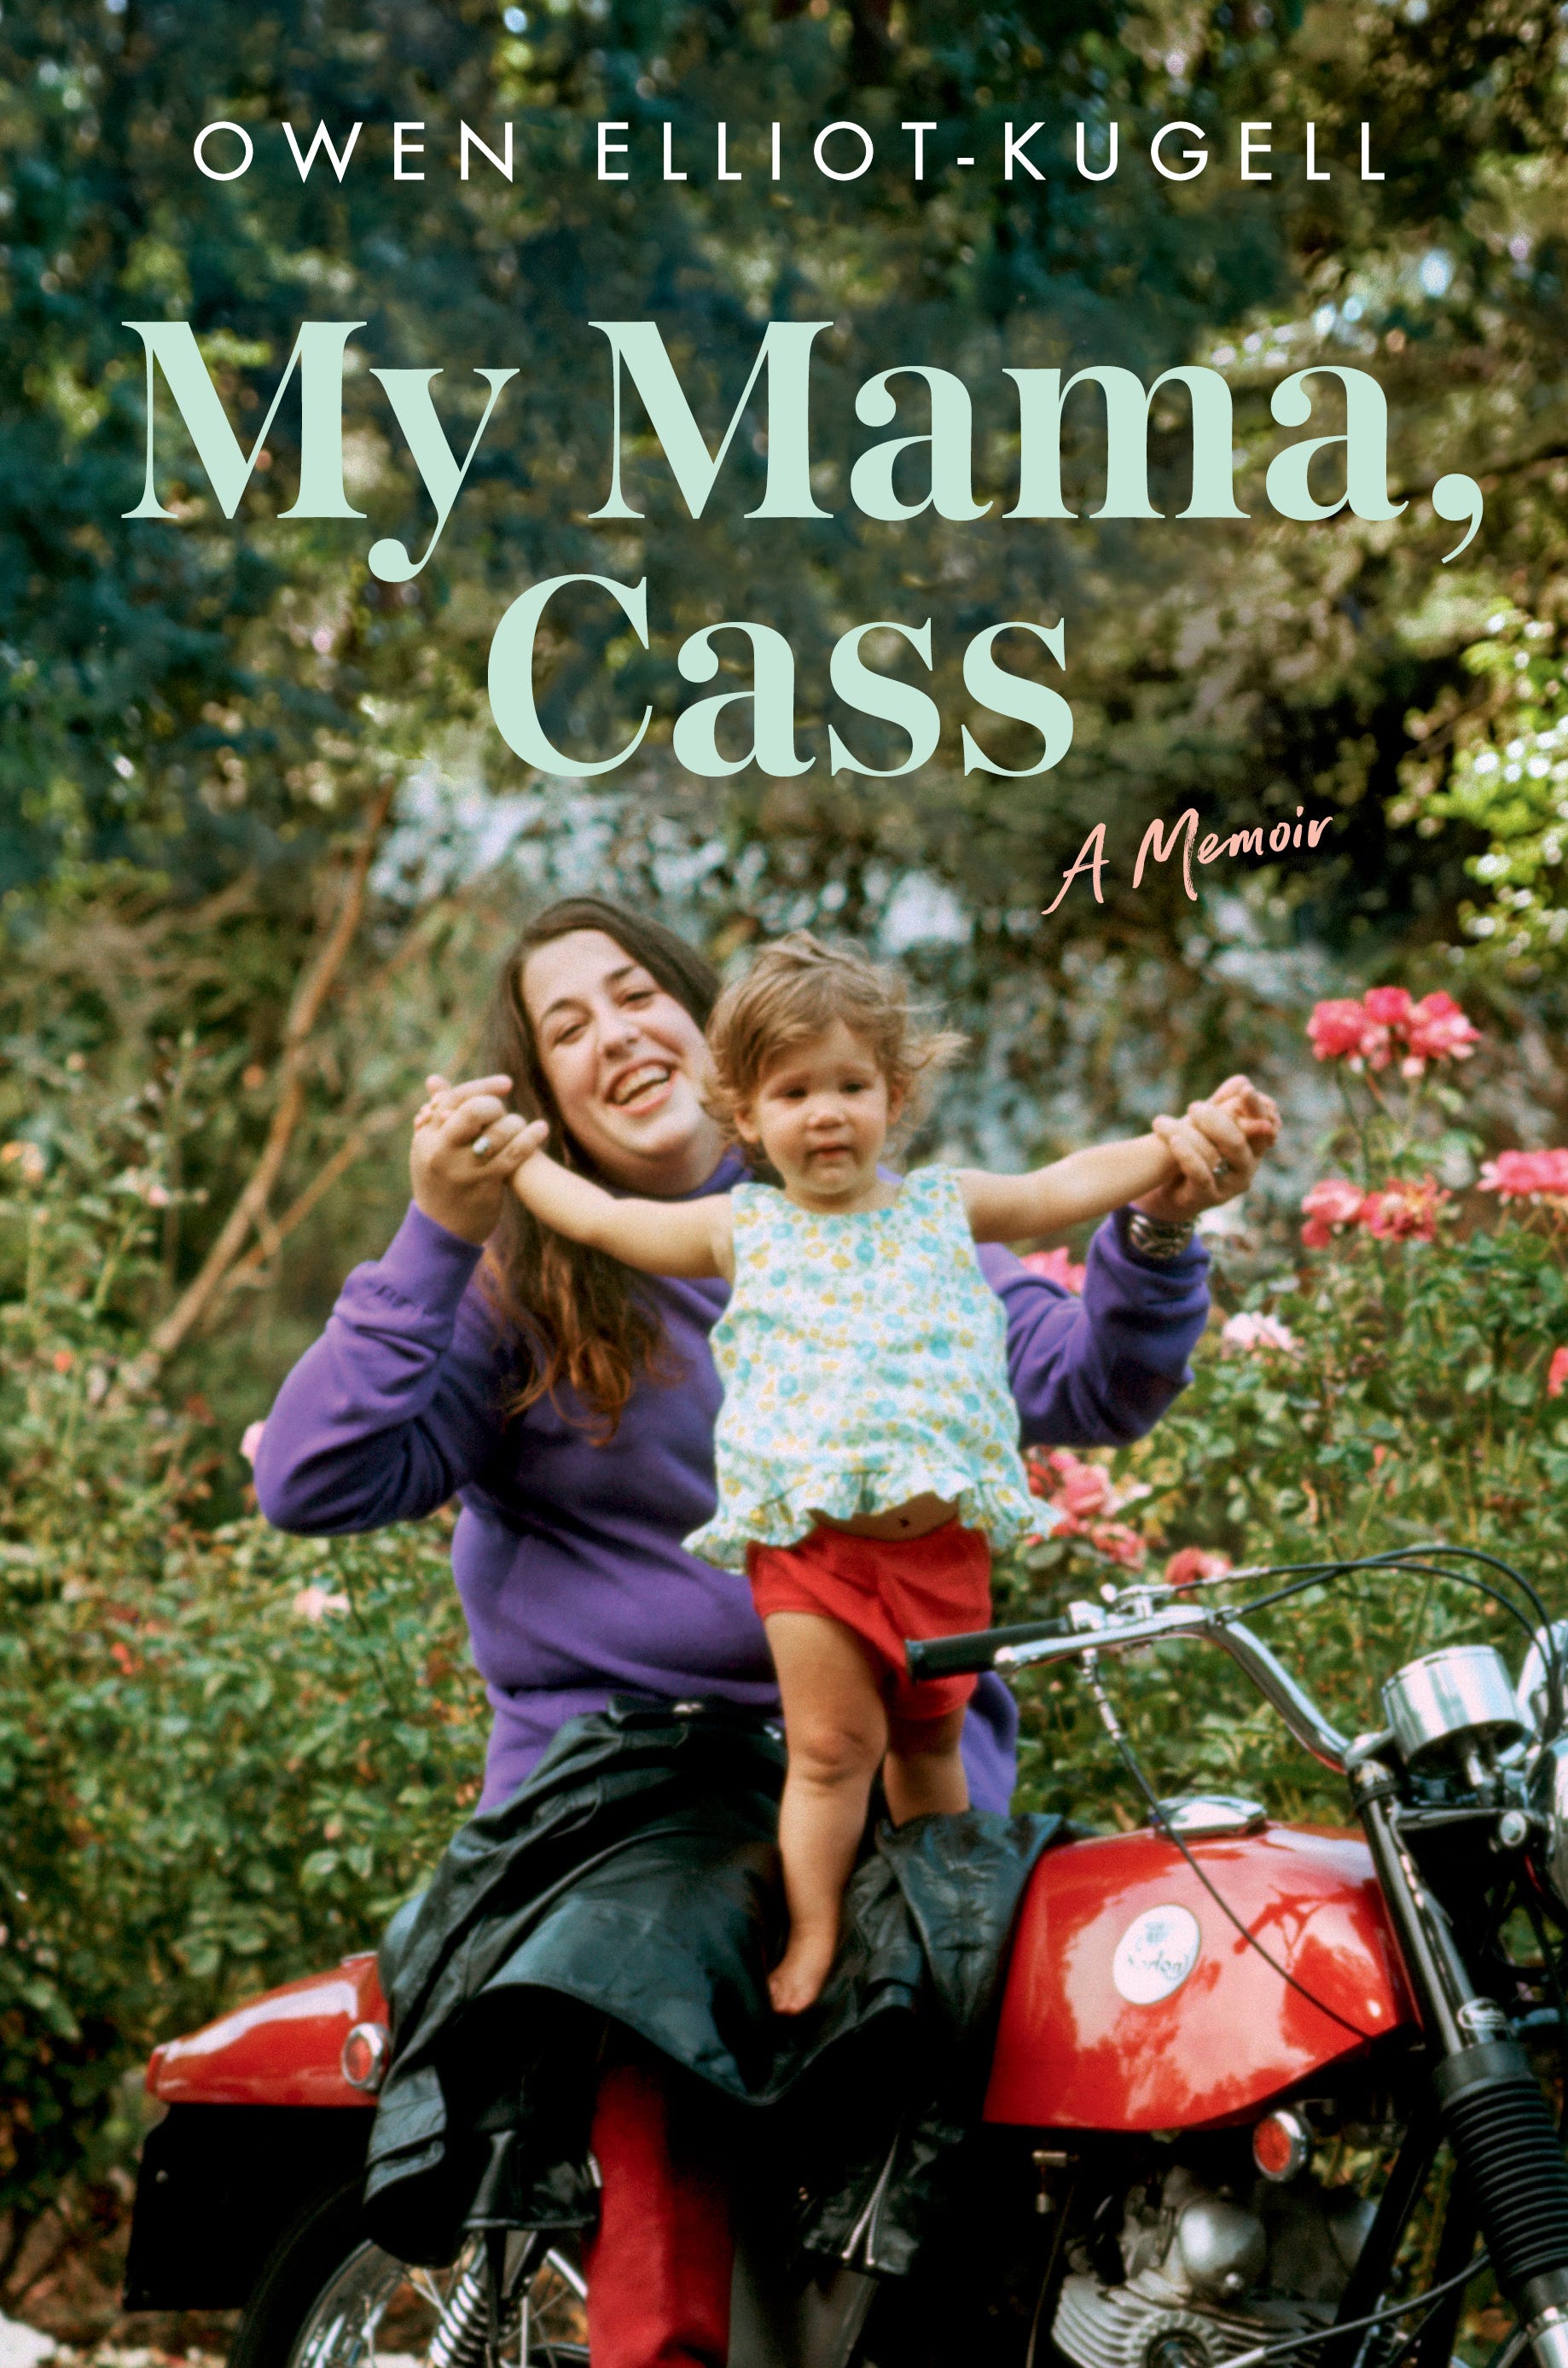 mama cass' daughter debunks ham sandwich death myth, talks career that might have been